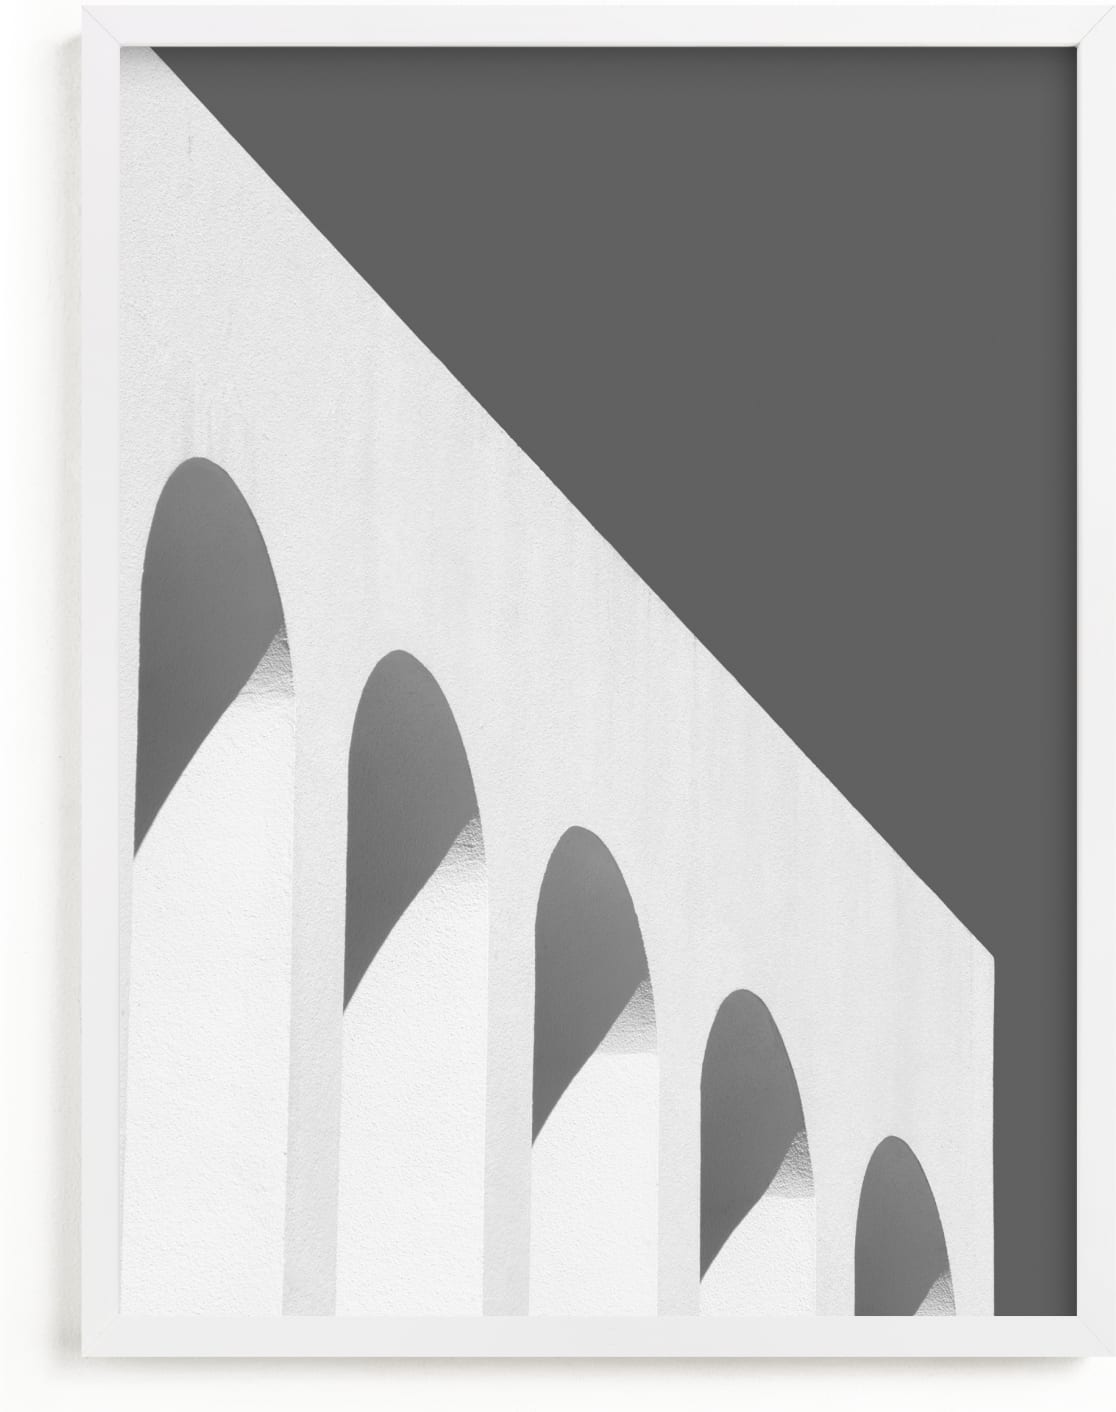 This is a black and white art by Alaric Yanos called Arches in black and white.